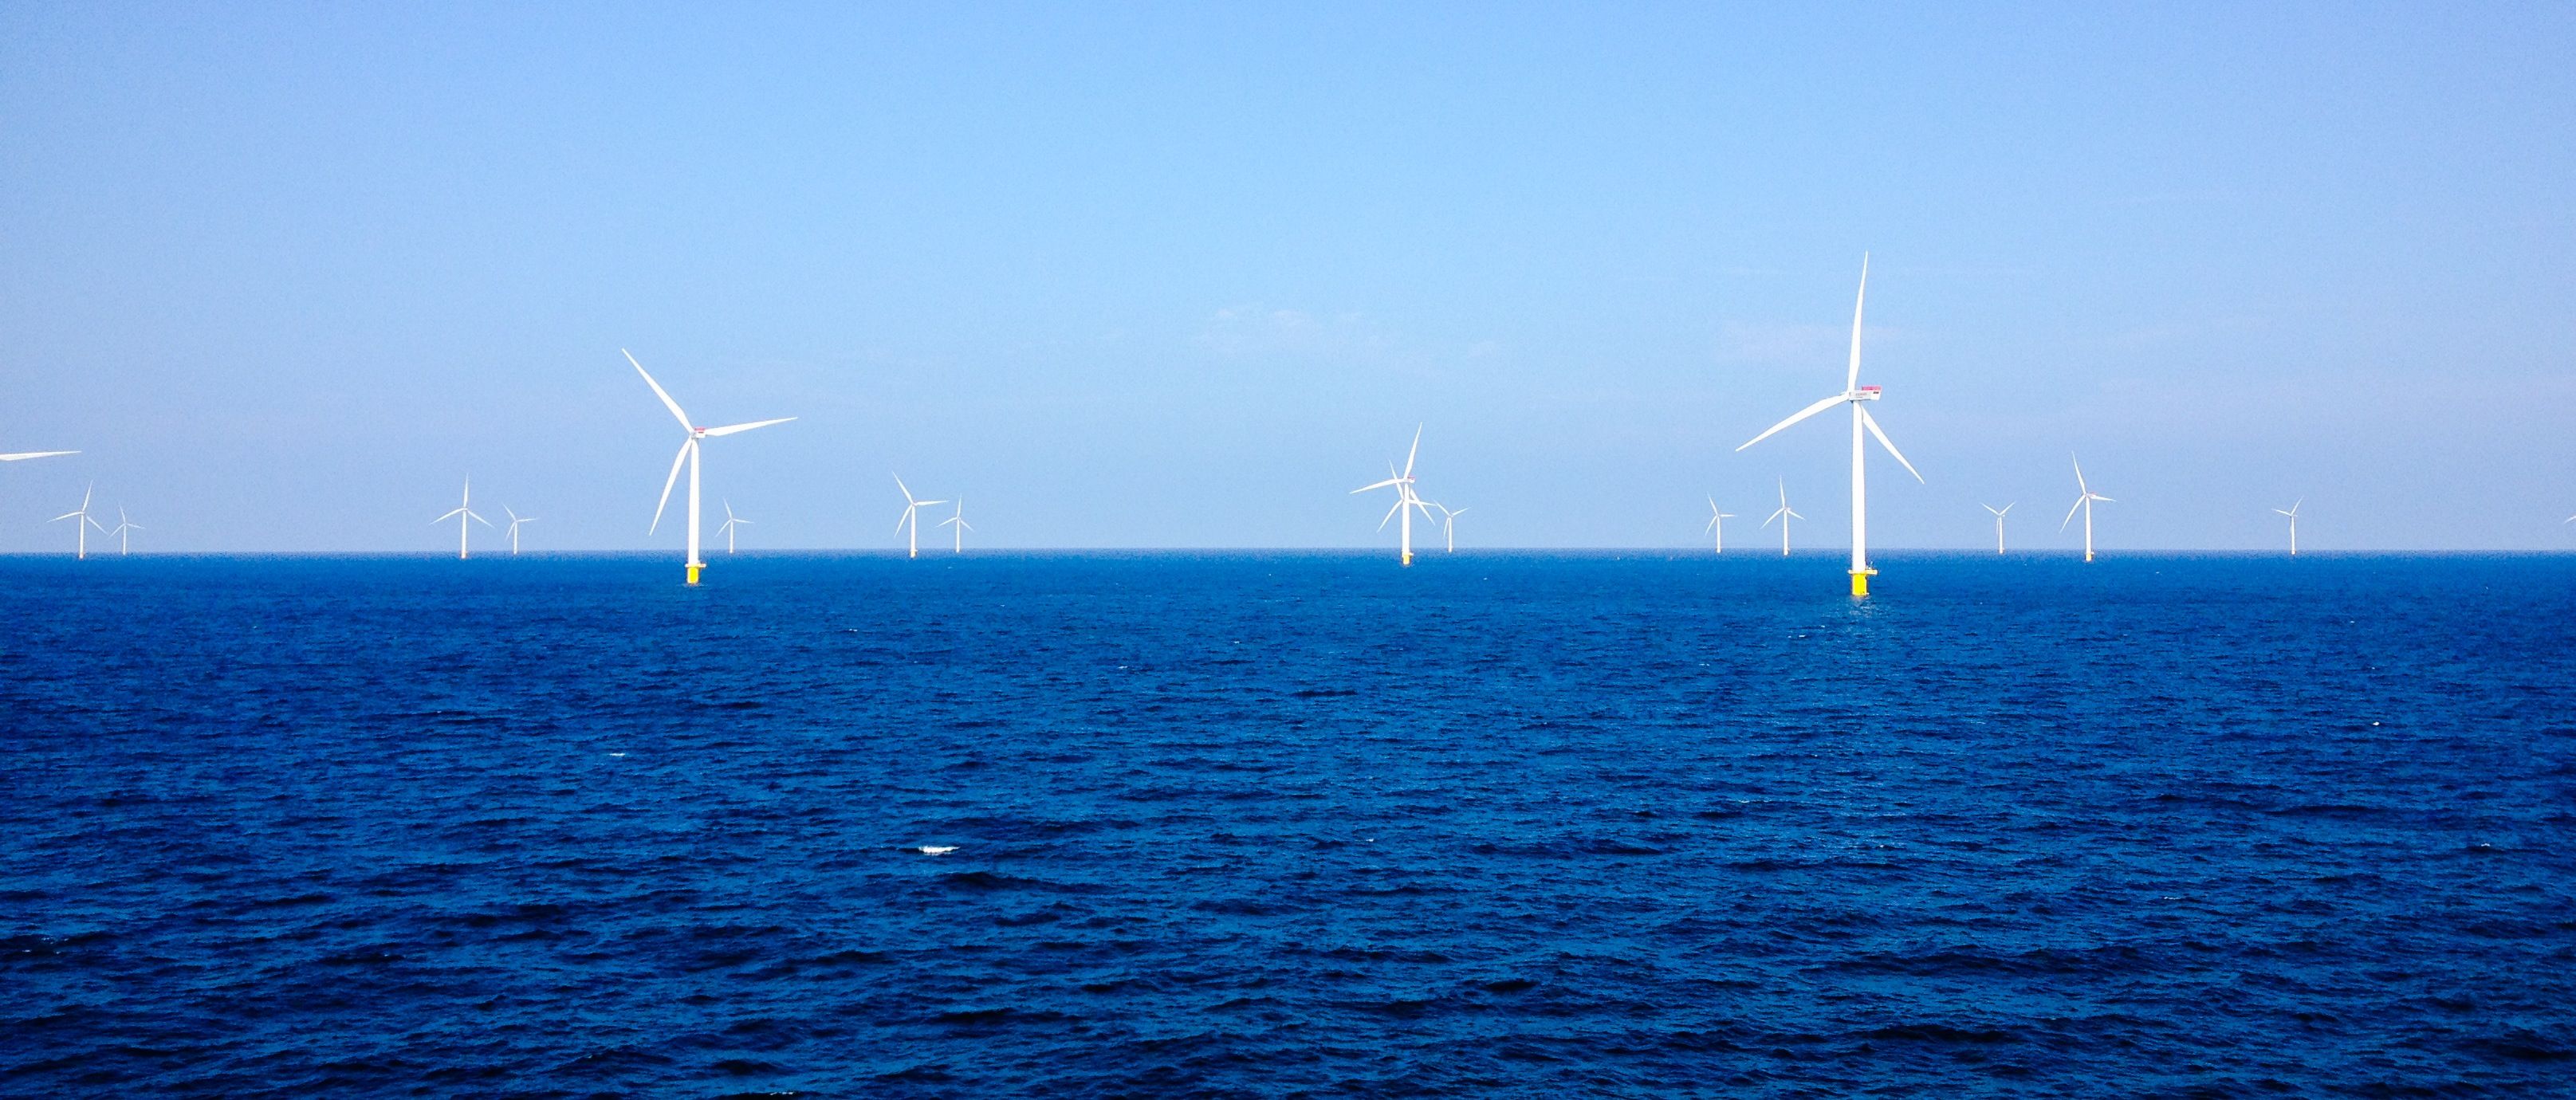 Anholt Offshore Wind Farm - Wikipedia